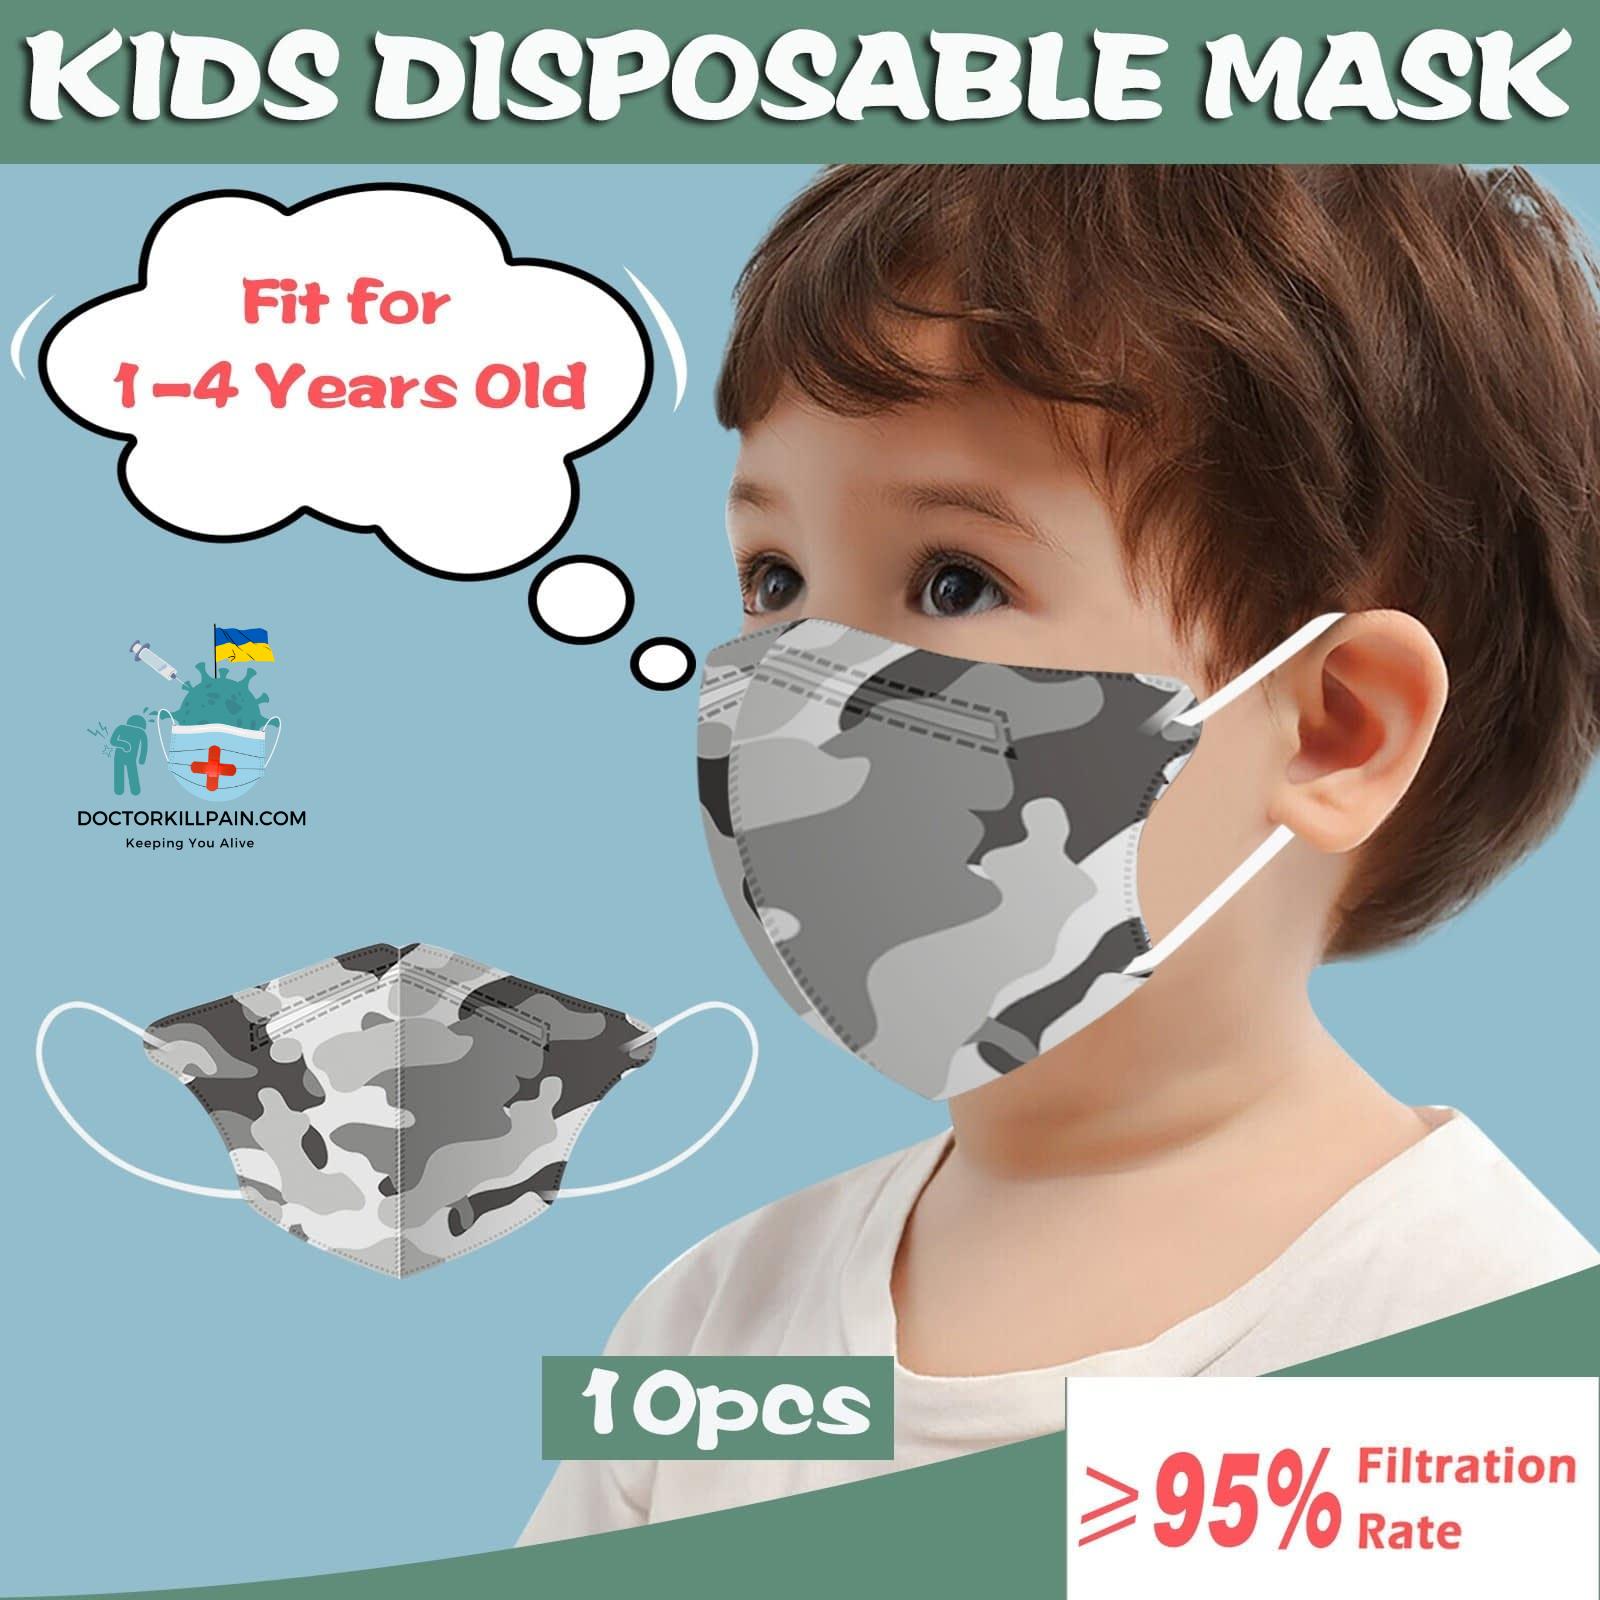 Day Care, Face Mask's 10PC Child Kids Disposable Mask Cartoon Printing Protection Face Mouth Mask Baby 3D Face Cover Facemask VIP Decoration